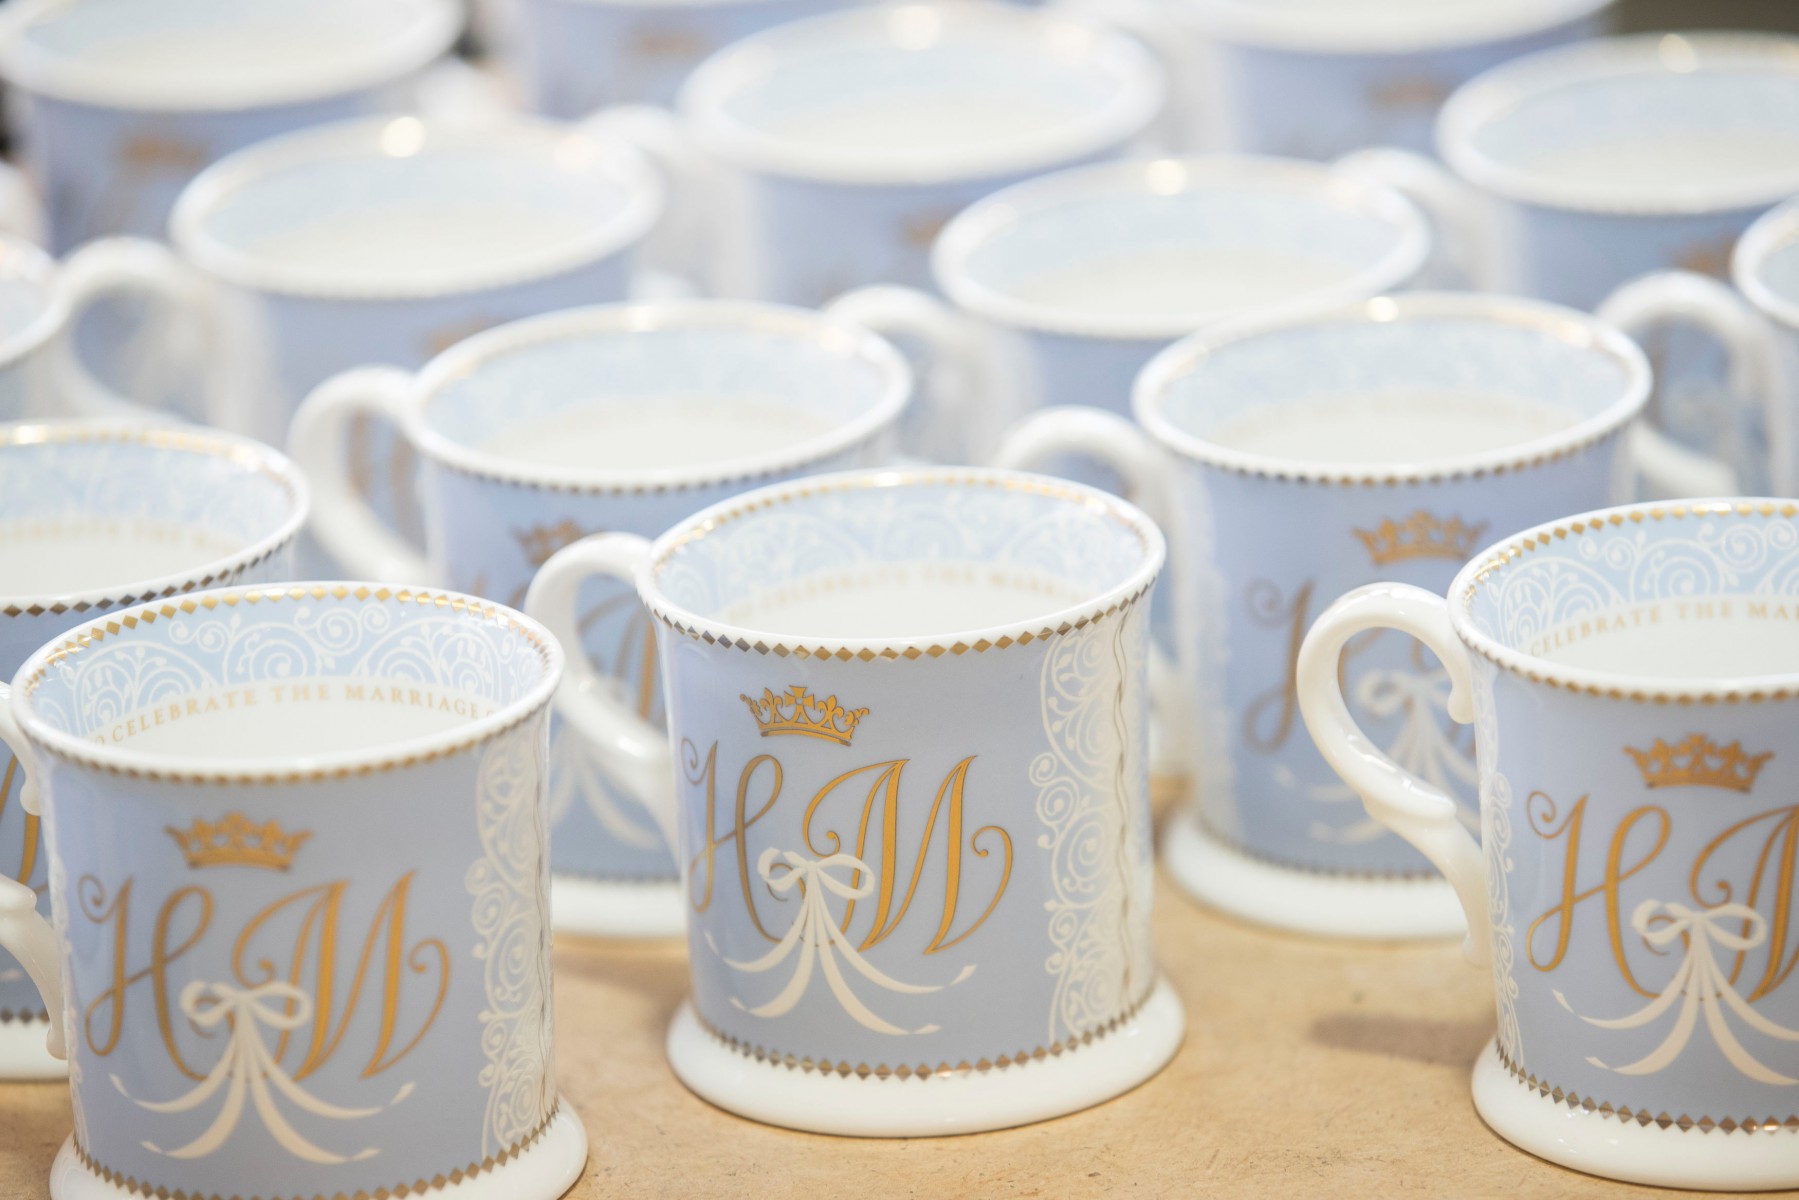 Harry and Meghan's official wedding souvenirs have disappeared from the Royal Collection website